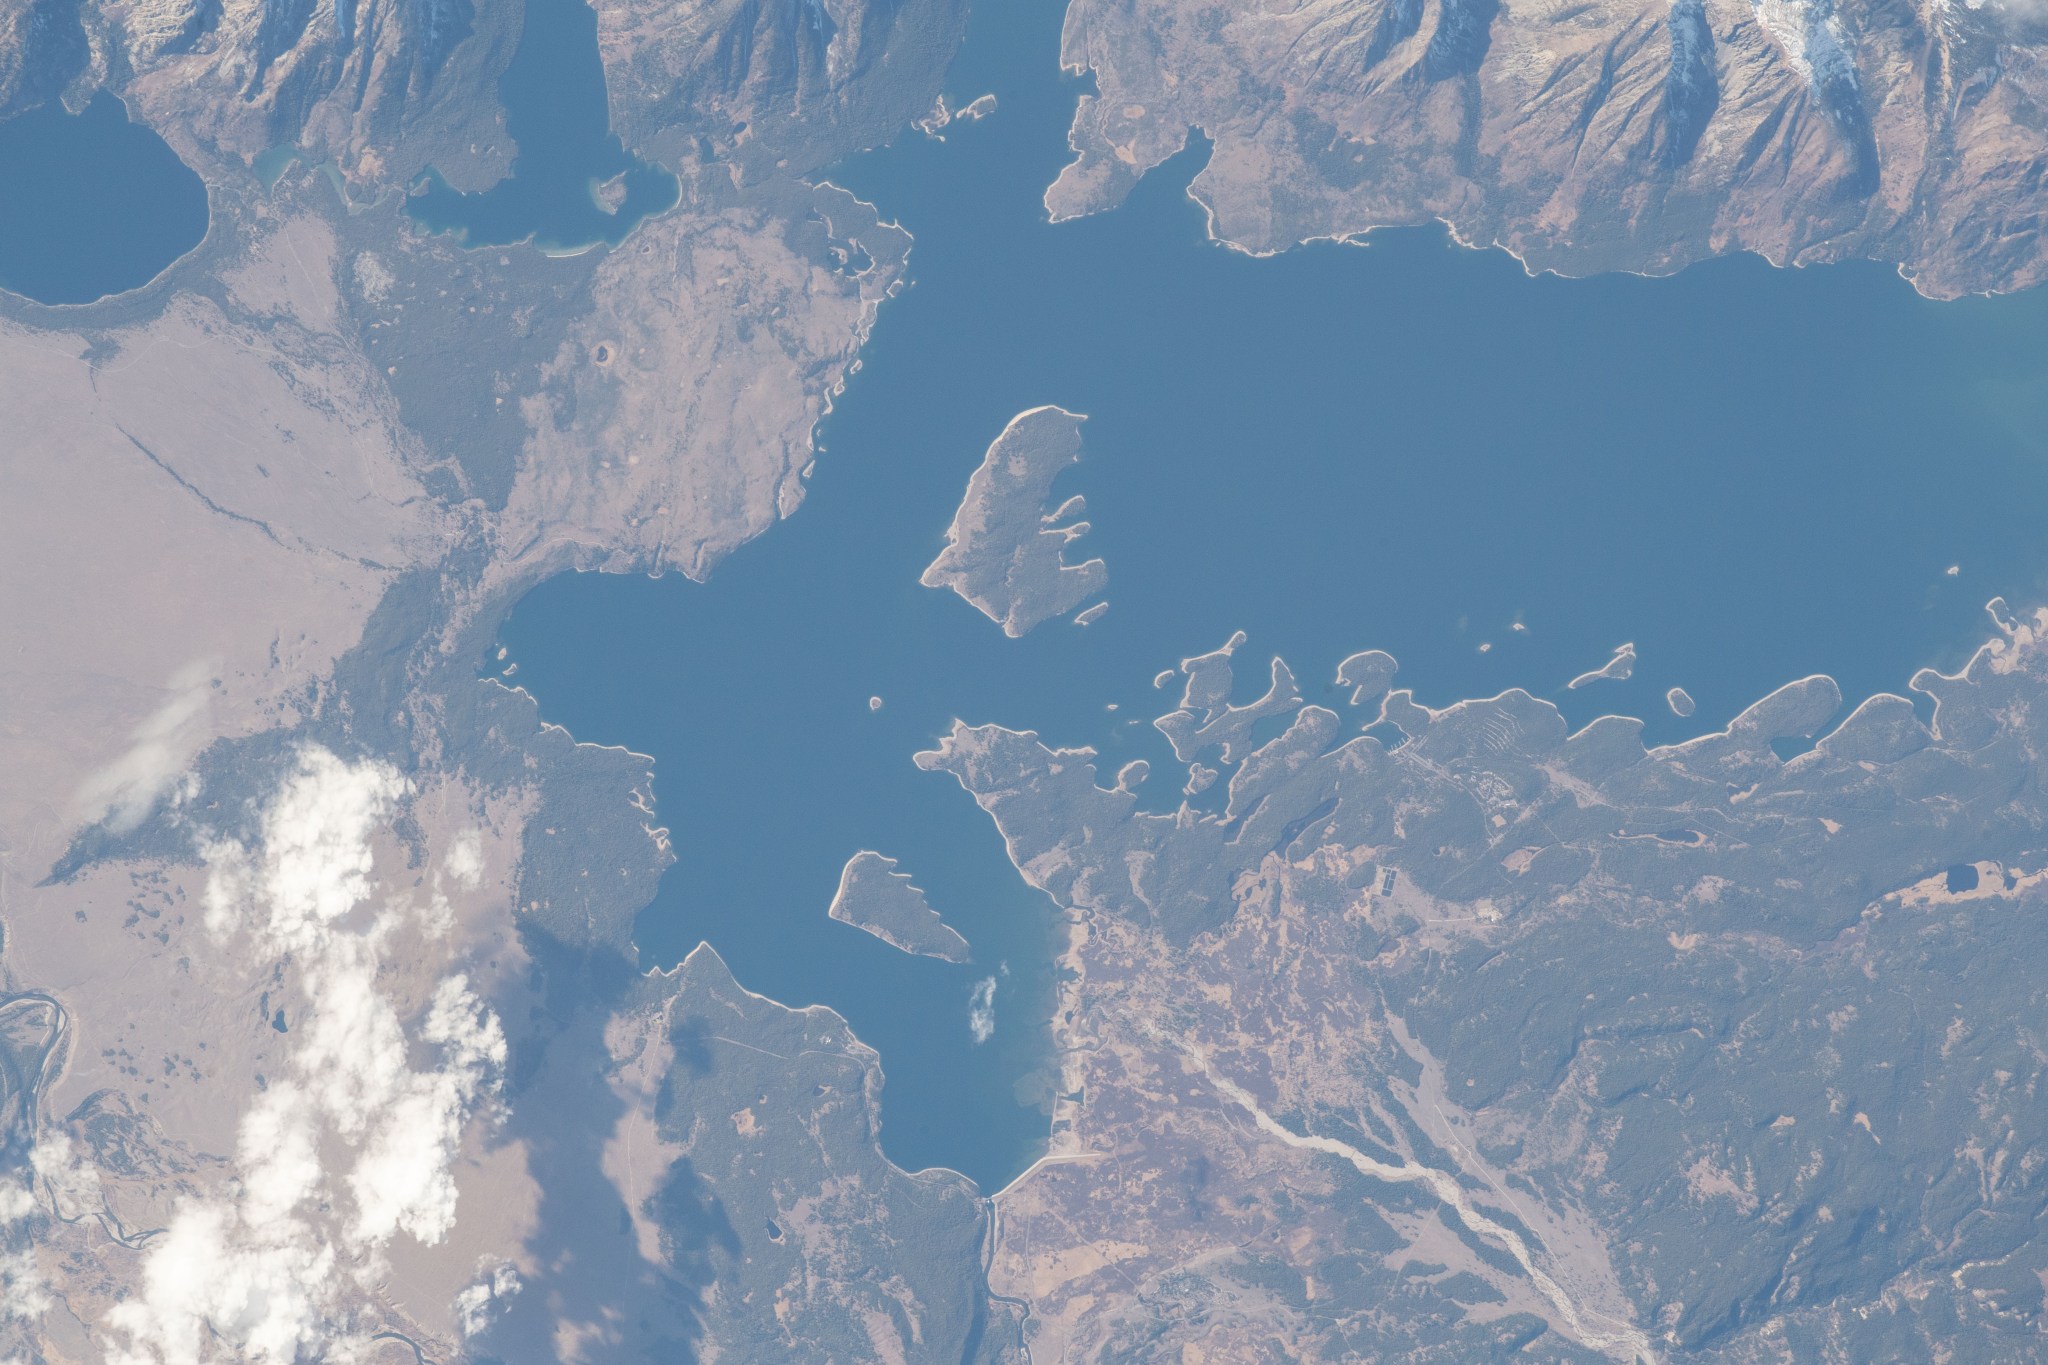 Jackson Lake, in the state of Wyoming's Grand Teton National Park, is a natural remnant of glacial gouging and was enlarged by the construction of the Jackson Lake Dam in the early 20th century. The International Space Station was orbiting nearly 256 miles above North America when this photograph was taken by an Expedition 57 crew member.